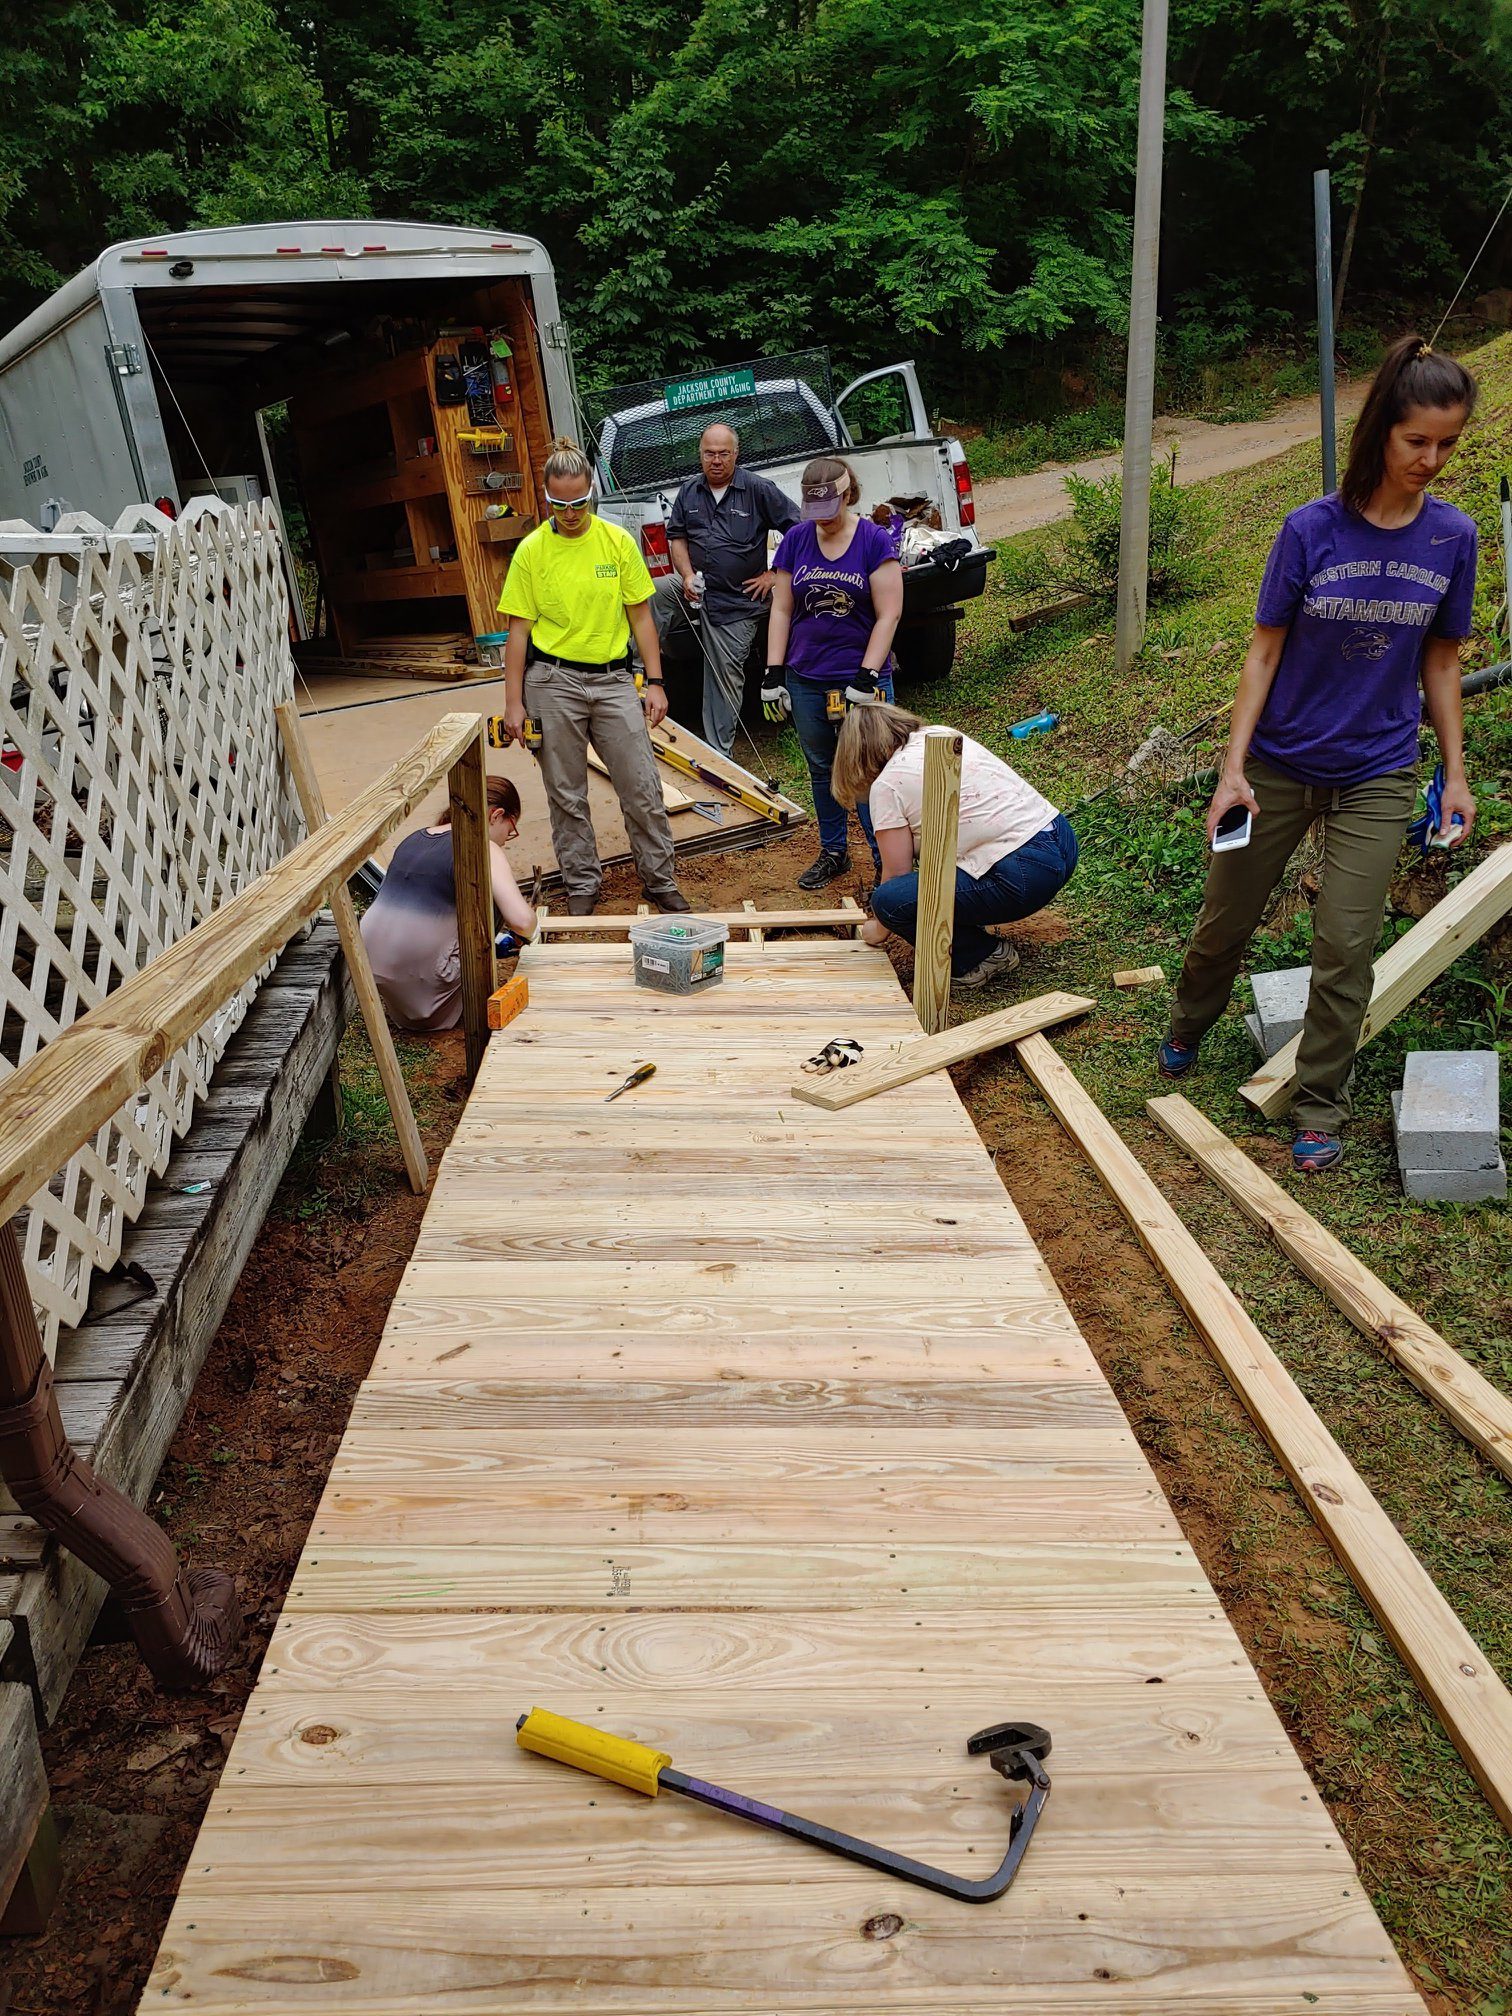 Staff Senate helped build a ramp for individuals in the community.